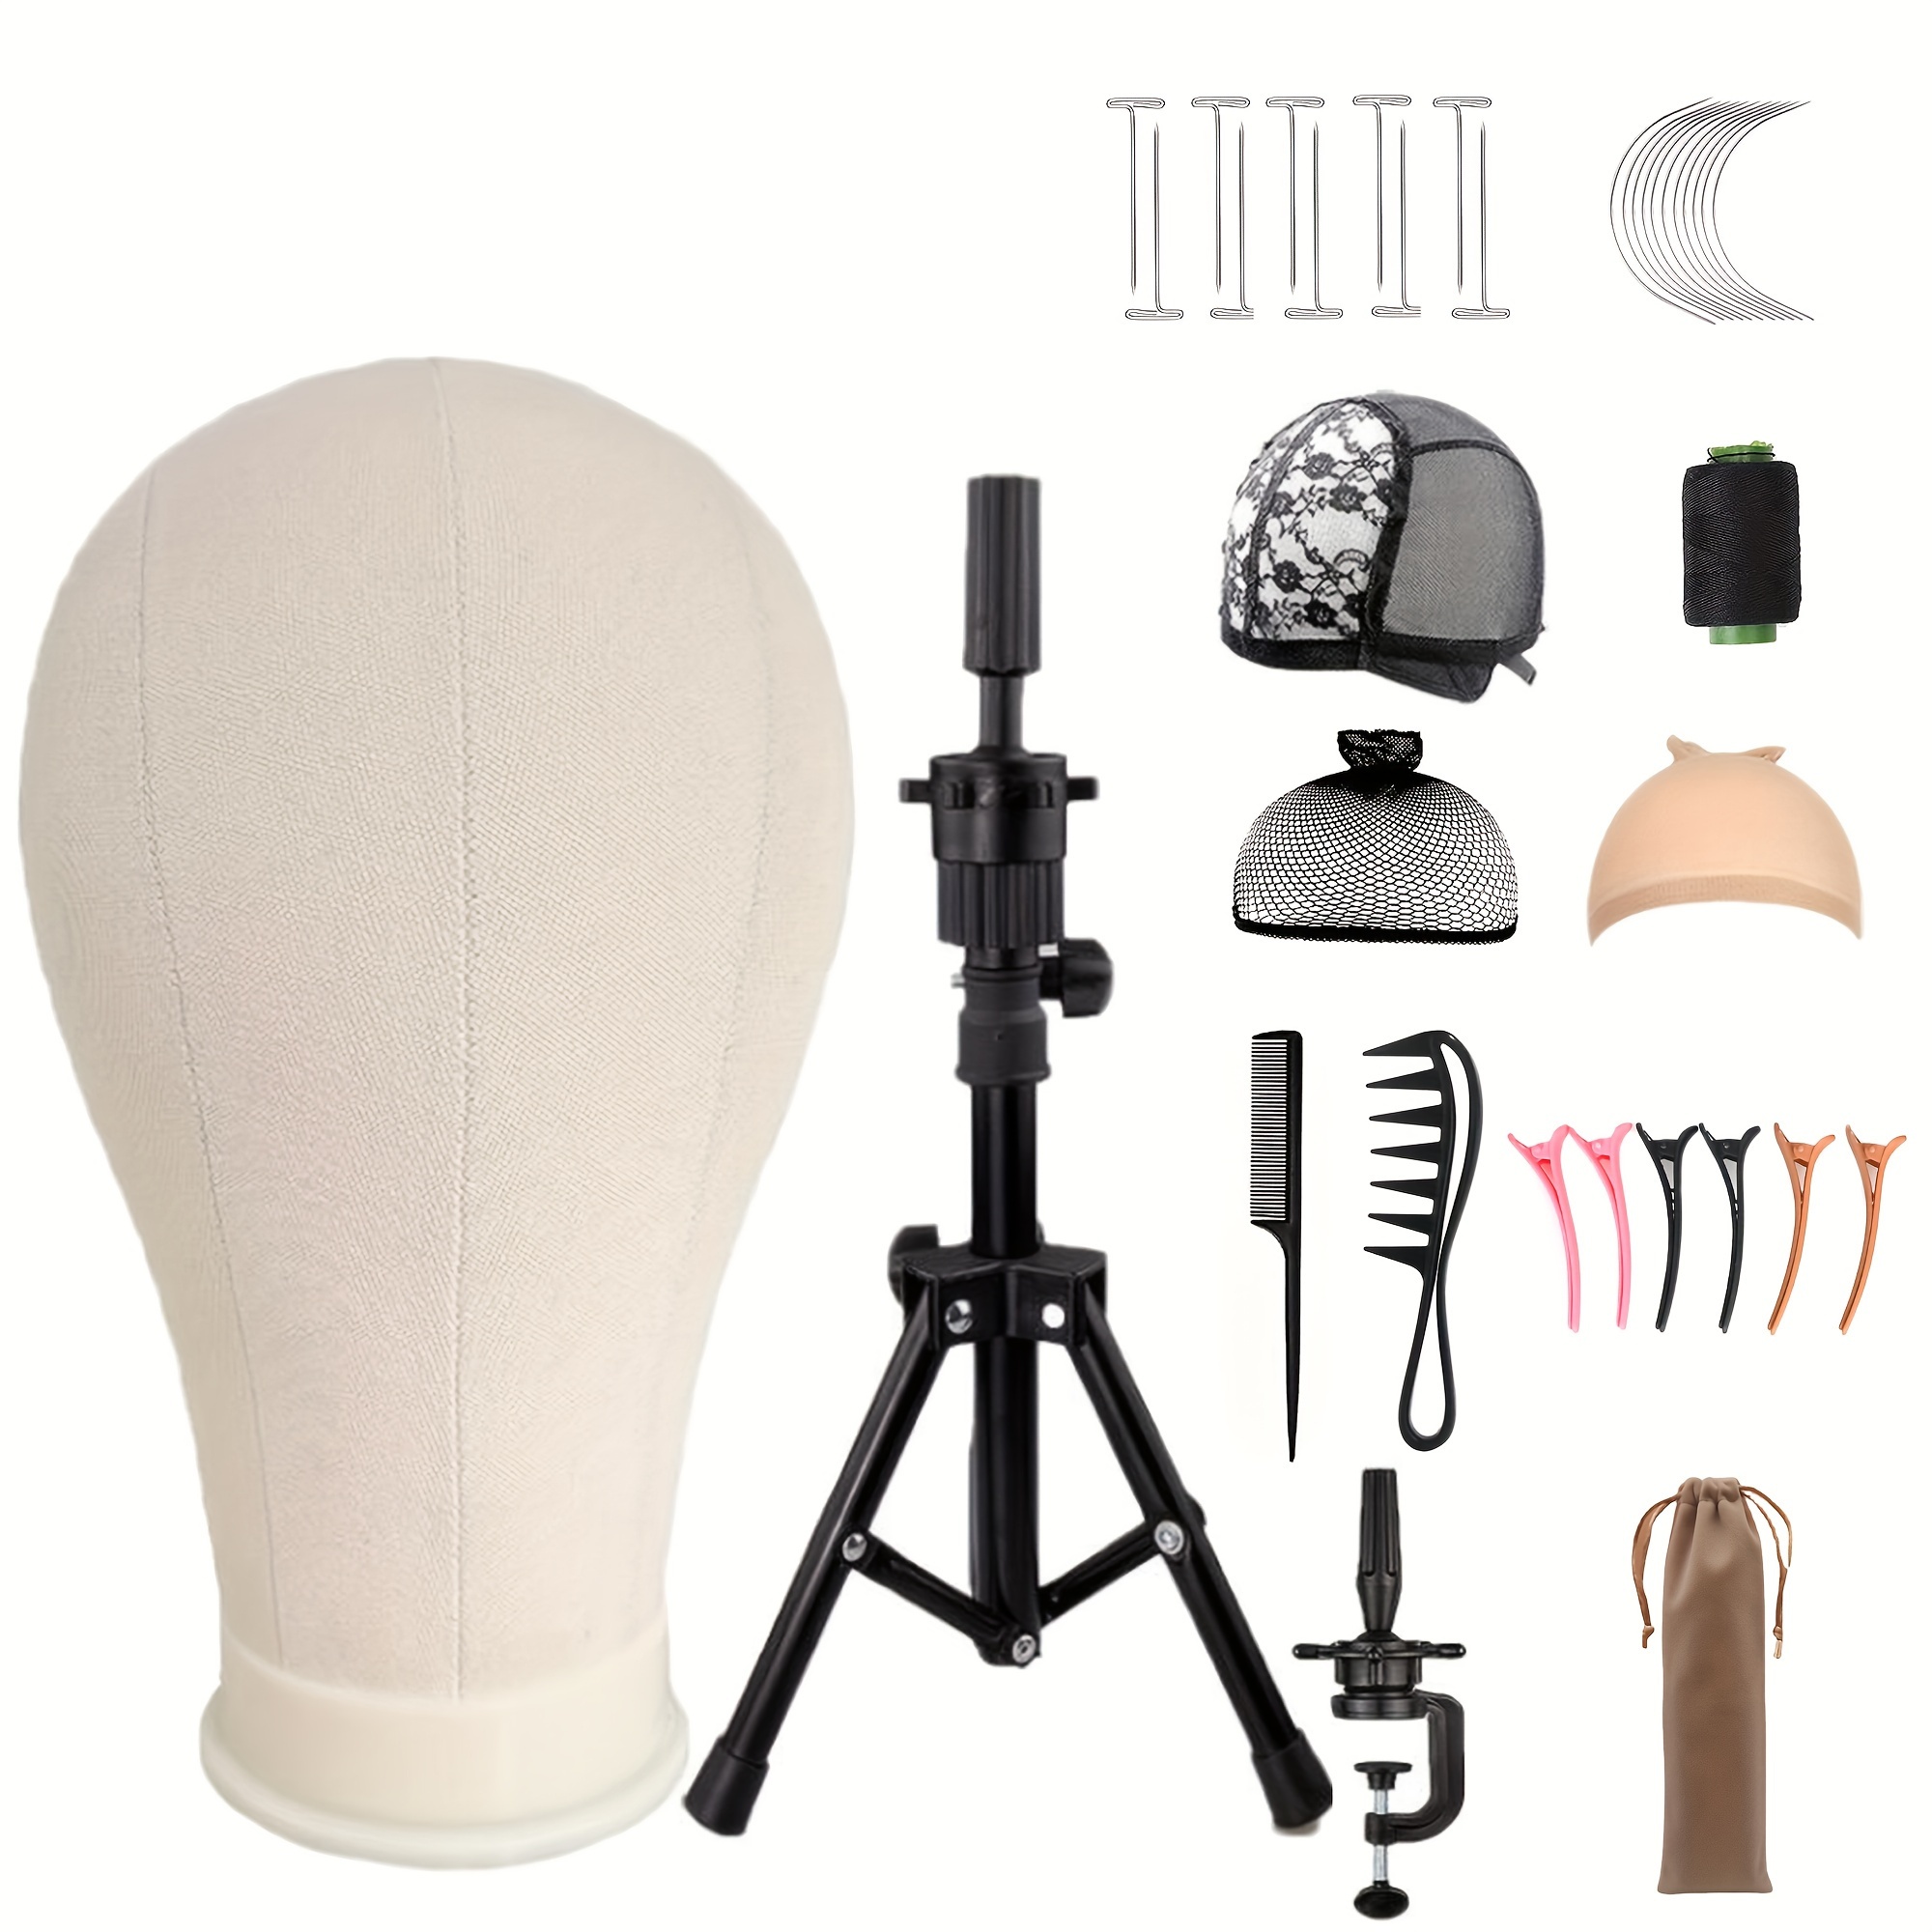 JMHAIR 22 Inch Wig Head, Wig Stand Tripod With Mannequin Head, Canvas Wig  Head Cork Block for Wig Making Set, Wig Head Stand with Table Clamp Set